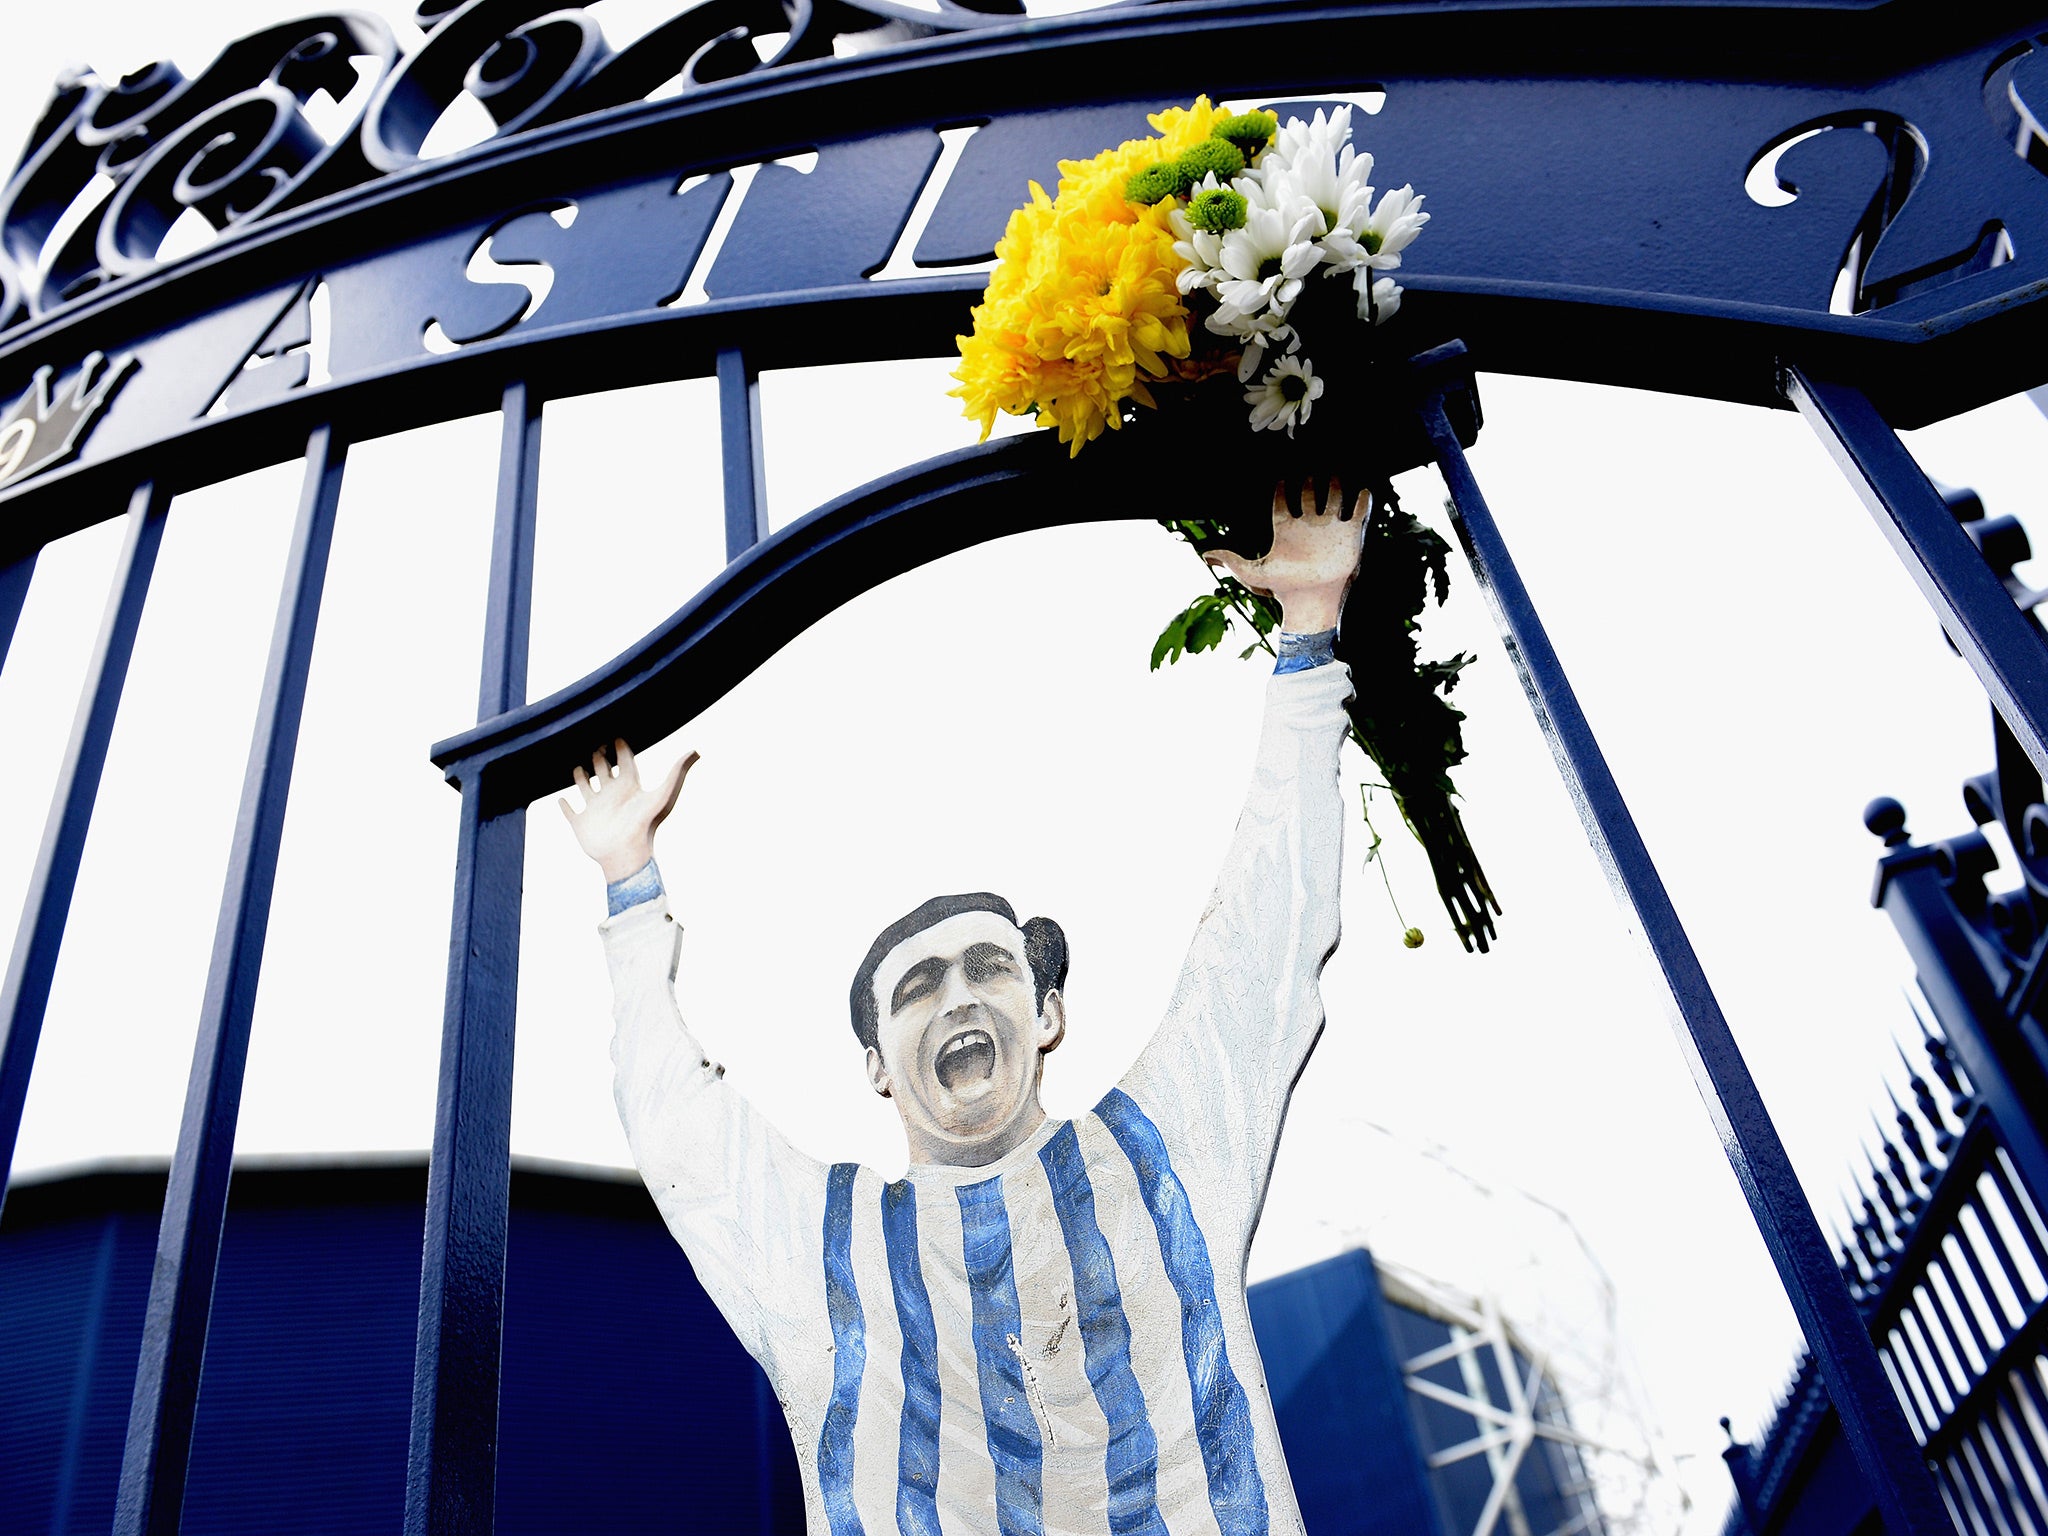 Gates outside West Bromwich Albion's ground commemorate the late Jeff Astle